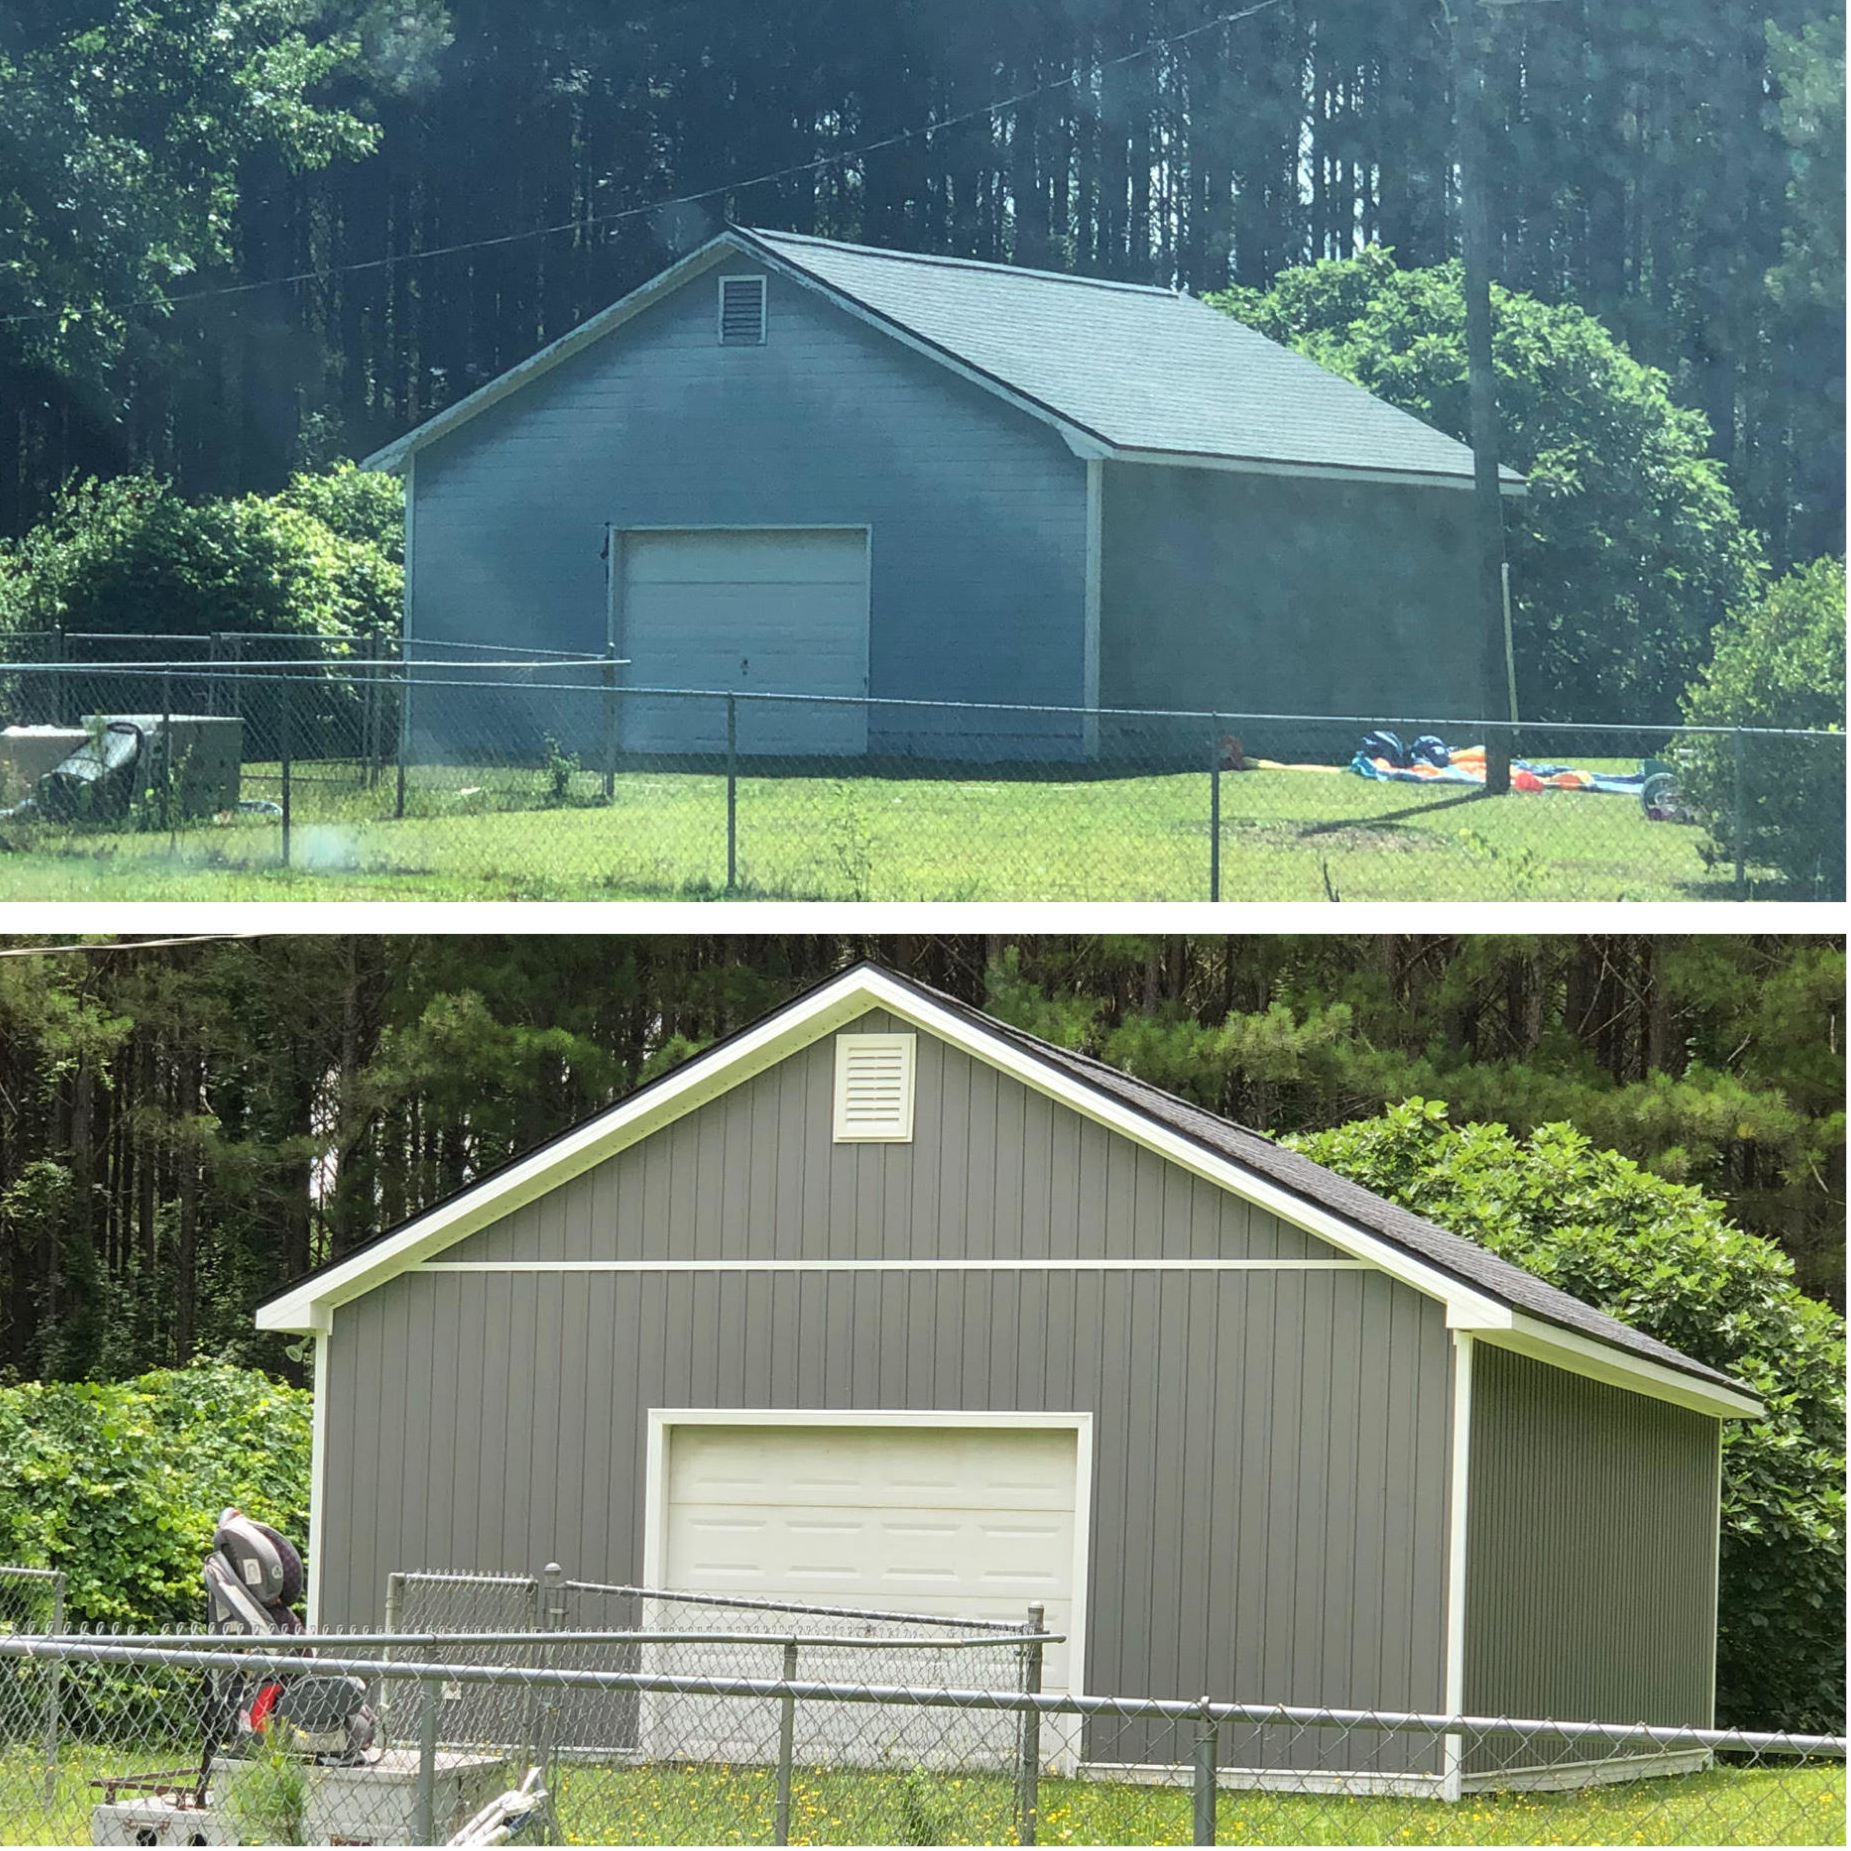 Siding Repair Before & After